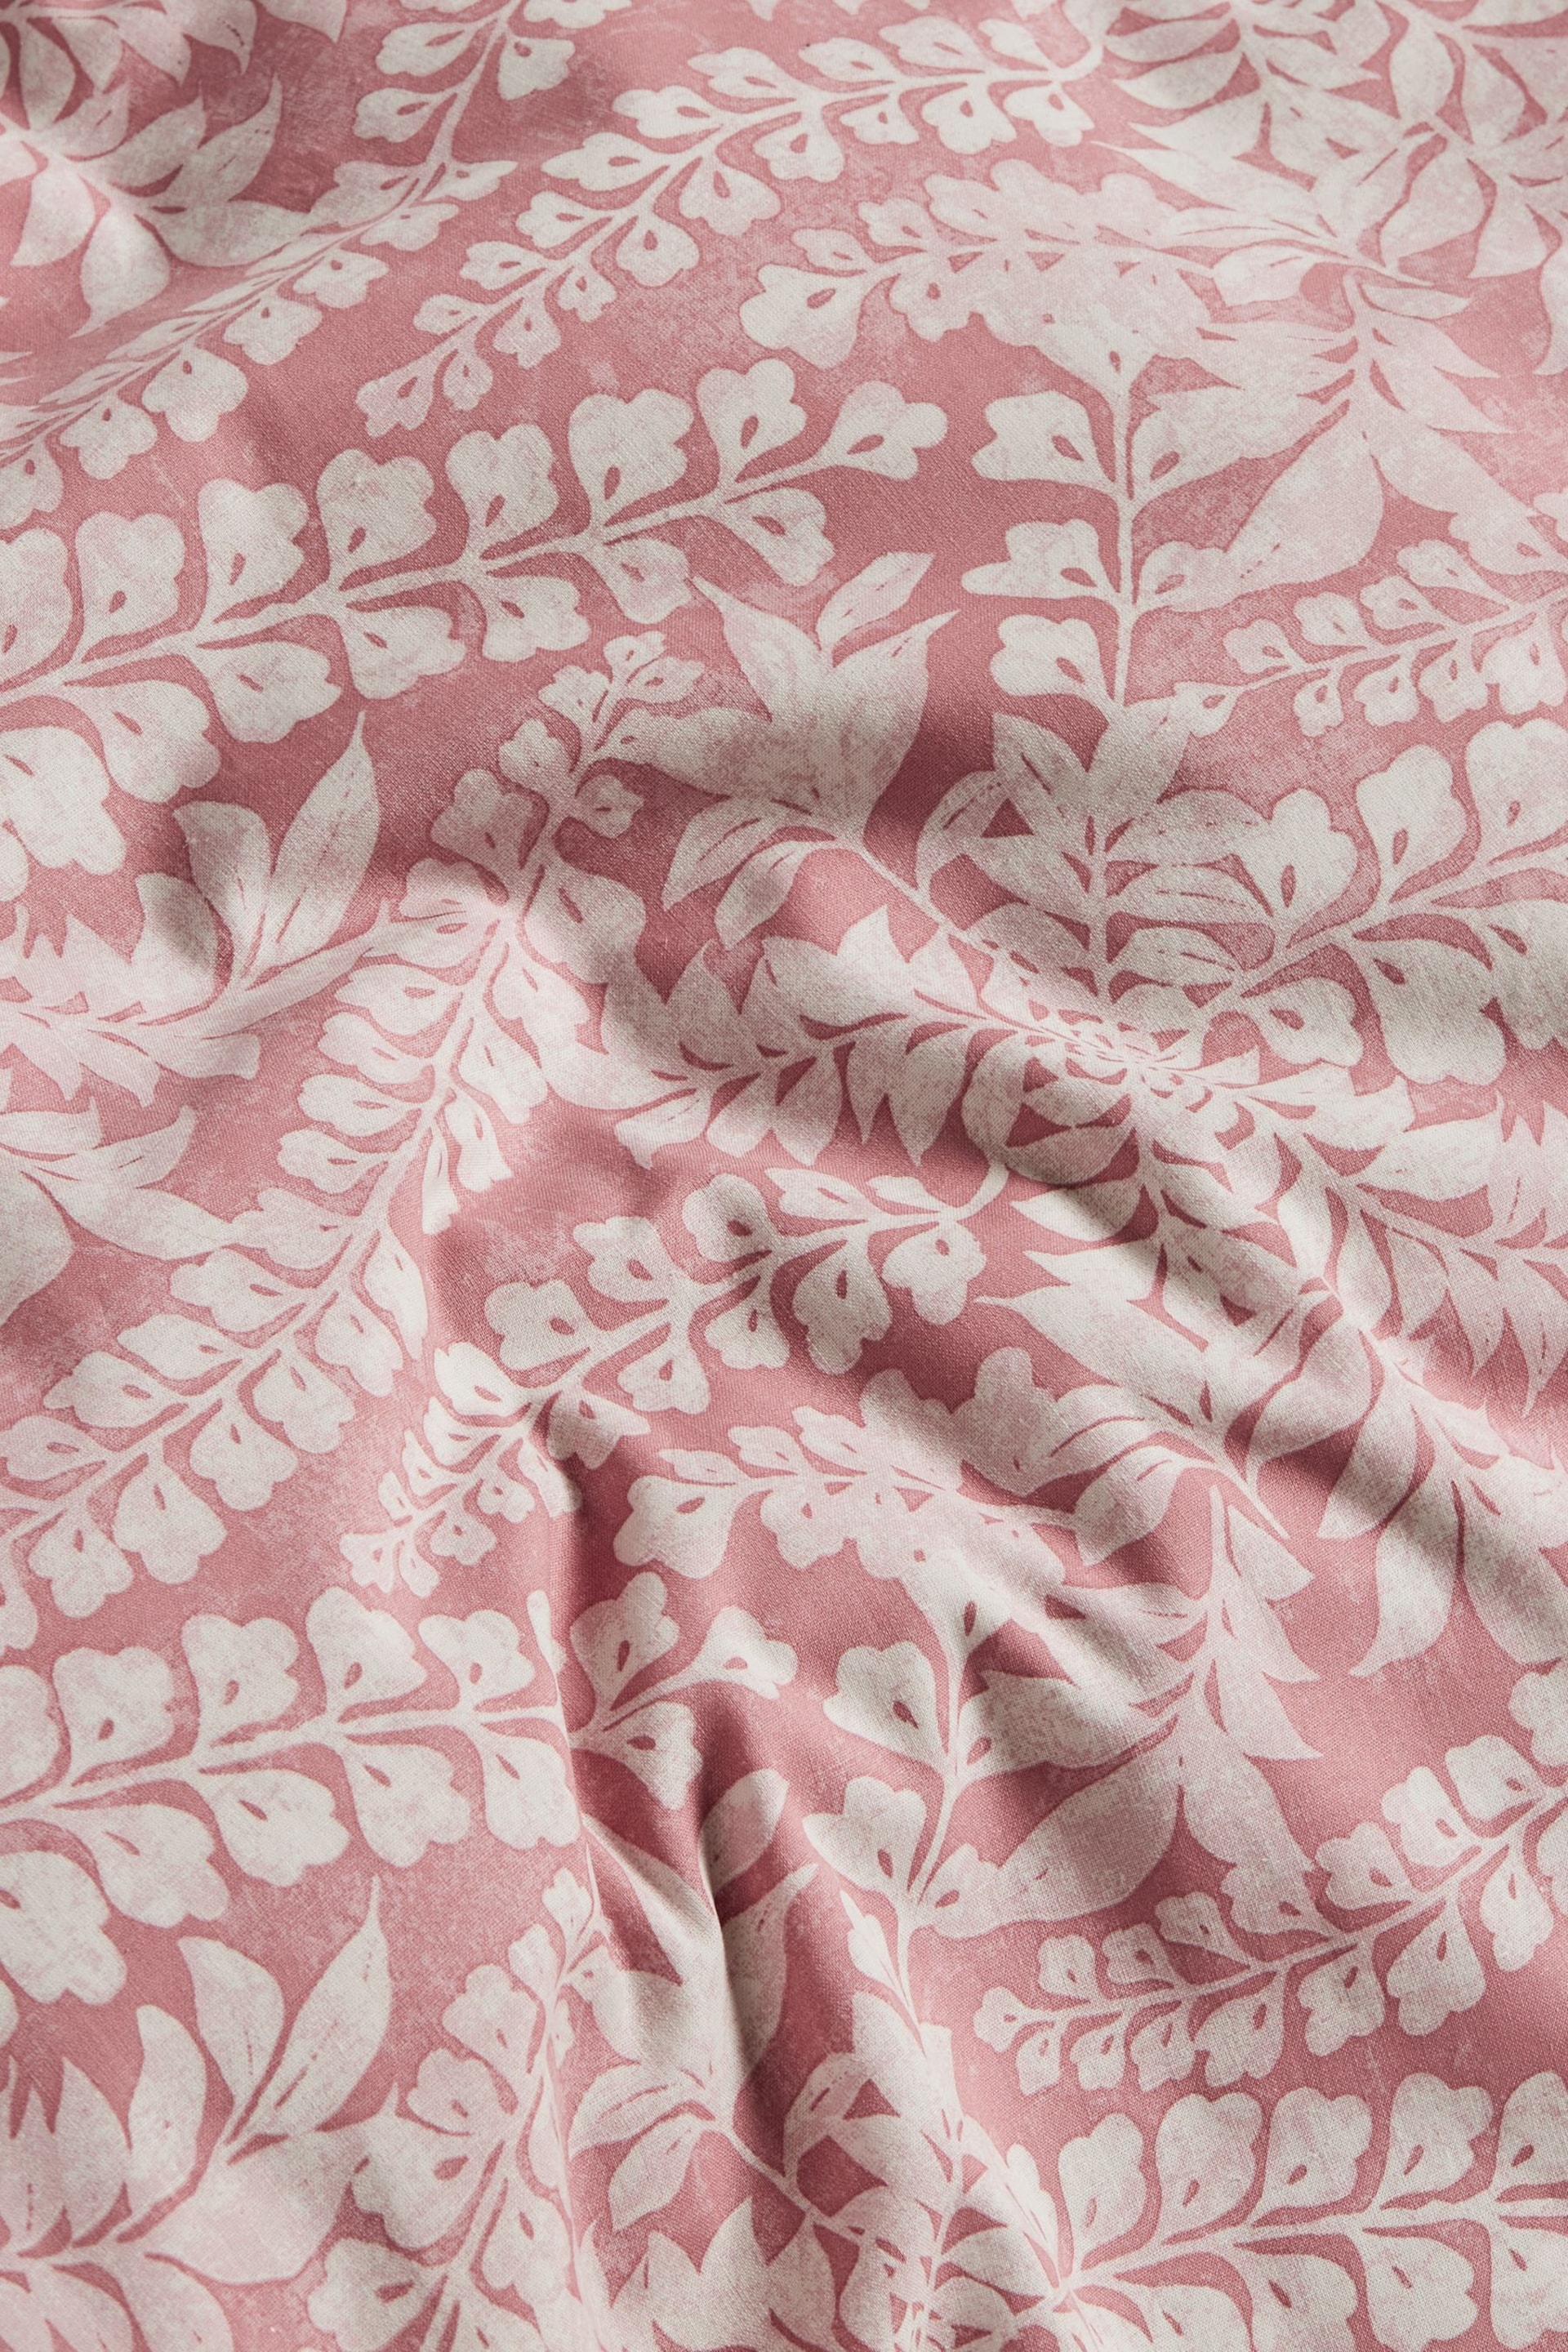 Pink Woodblock Reversible 100% Cotton Duvet Cover and Pillowcase Set - Image 7 of 8